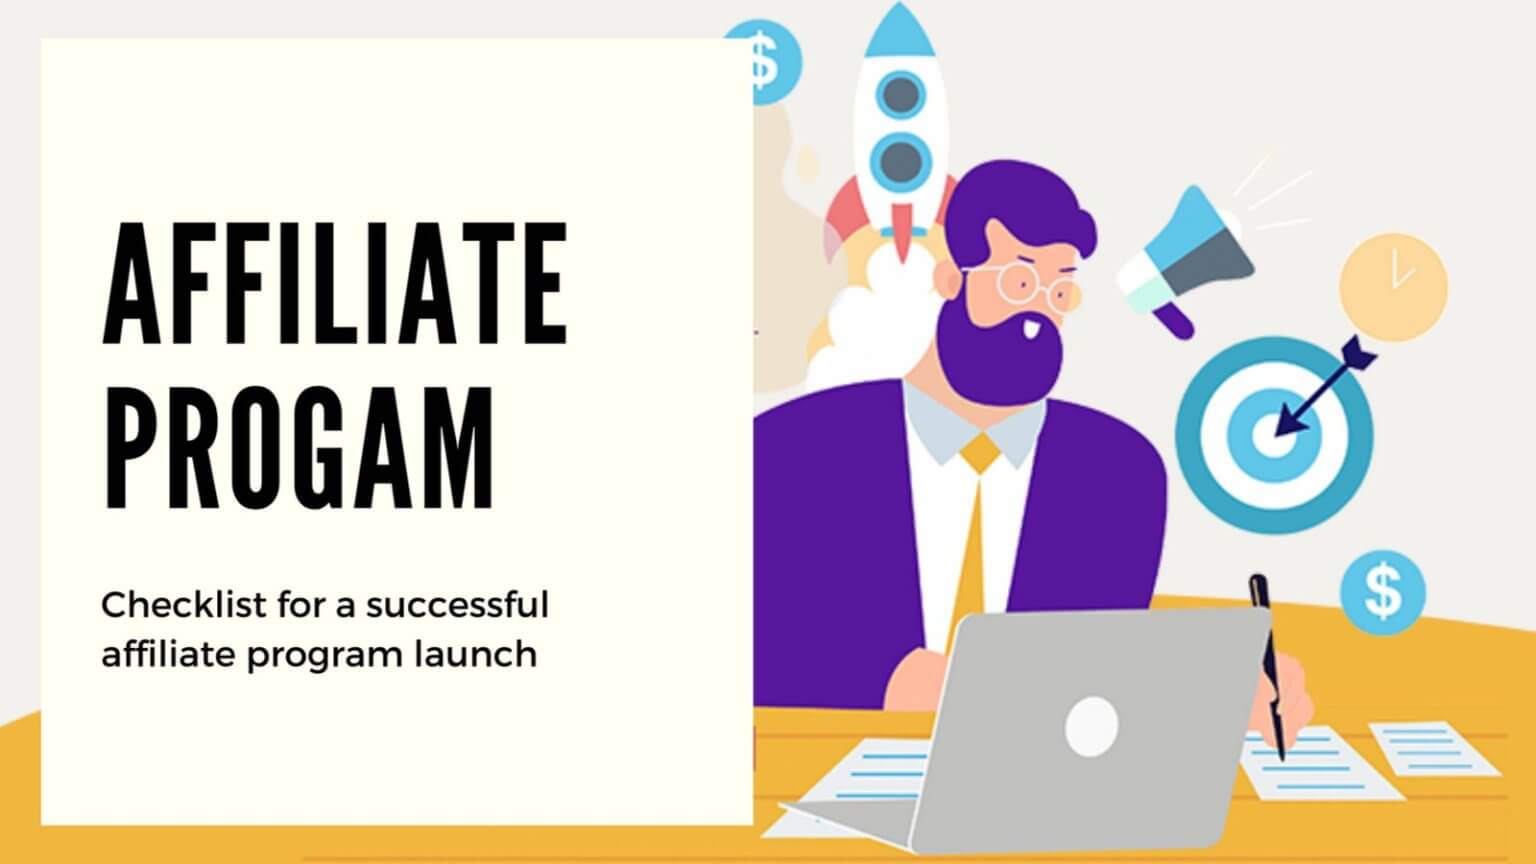 Checklist before launching a successful affiliate program